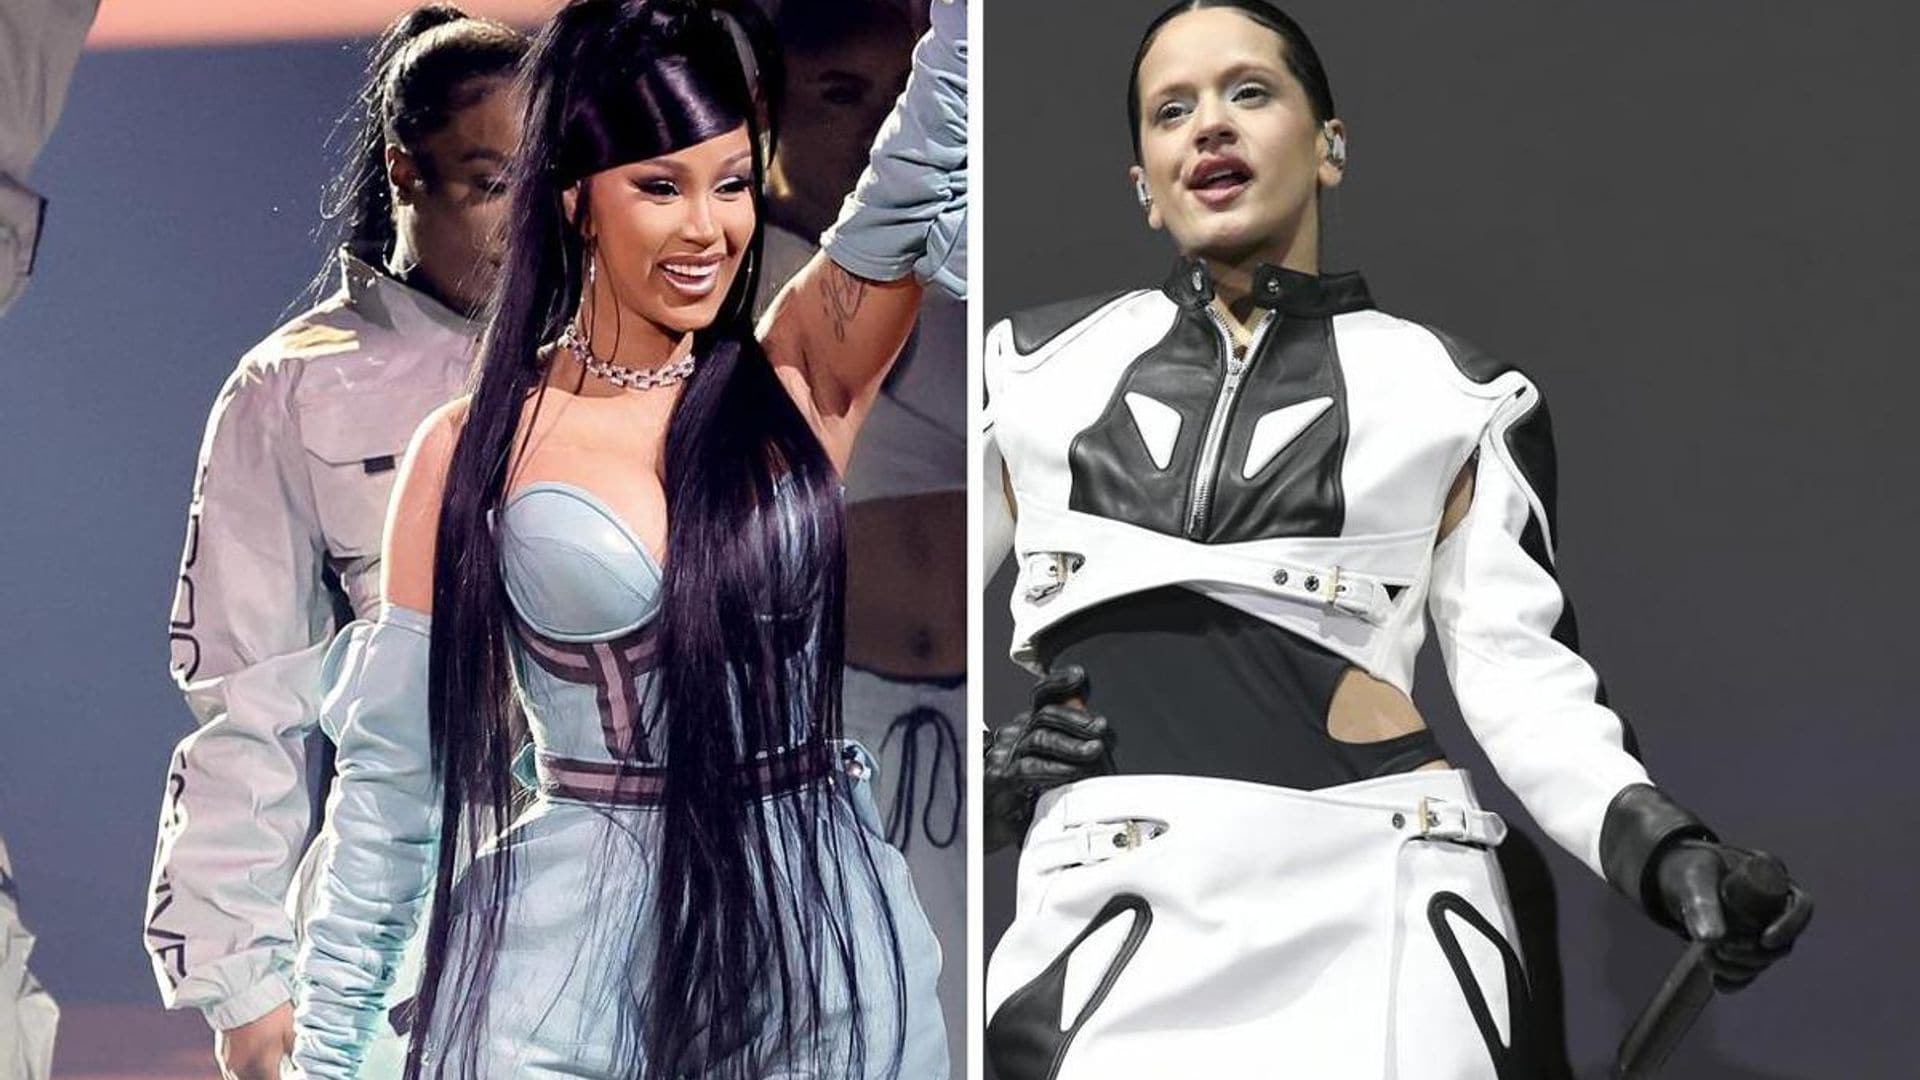 Cardi B joins Rosalía in new remix of her hit song ‘Despechá’